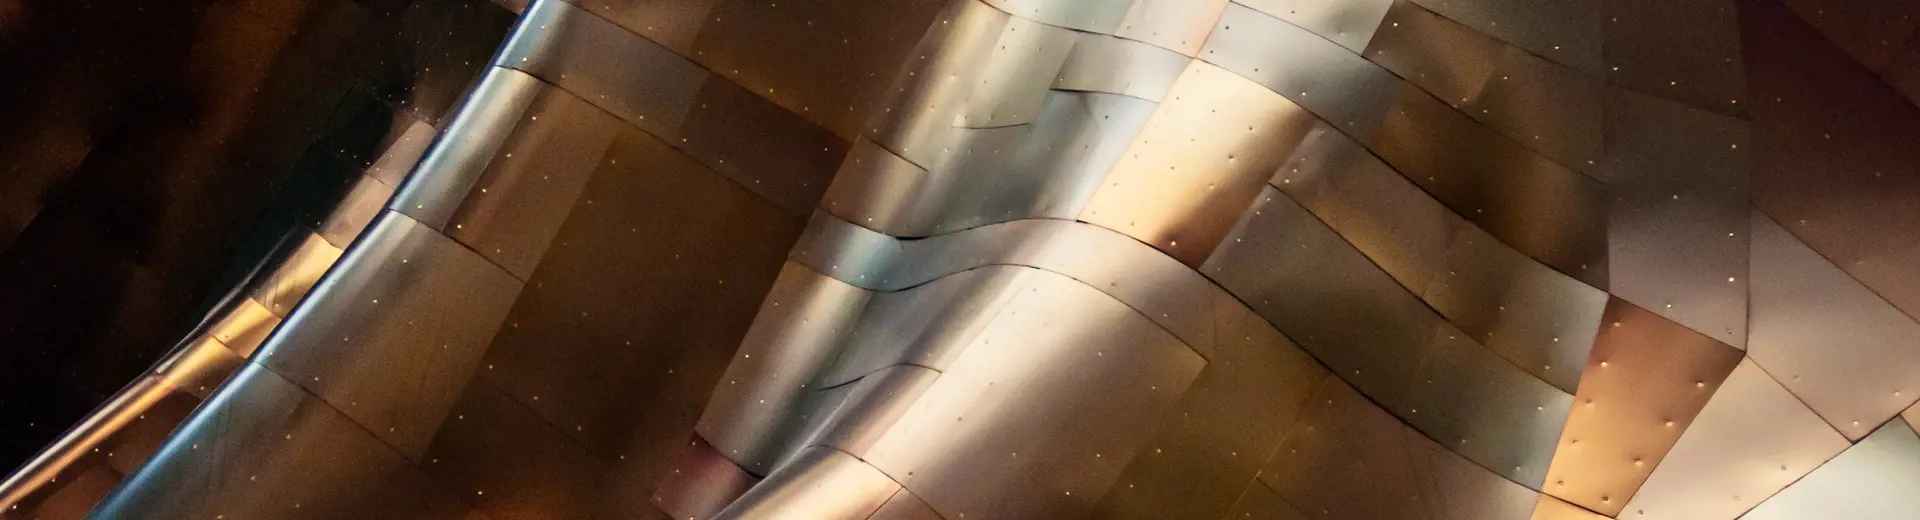 Abstract architectural design of sheet metal shaped in waves